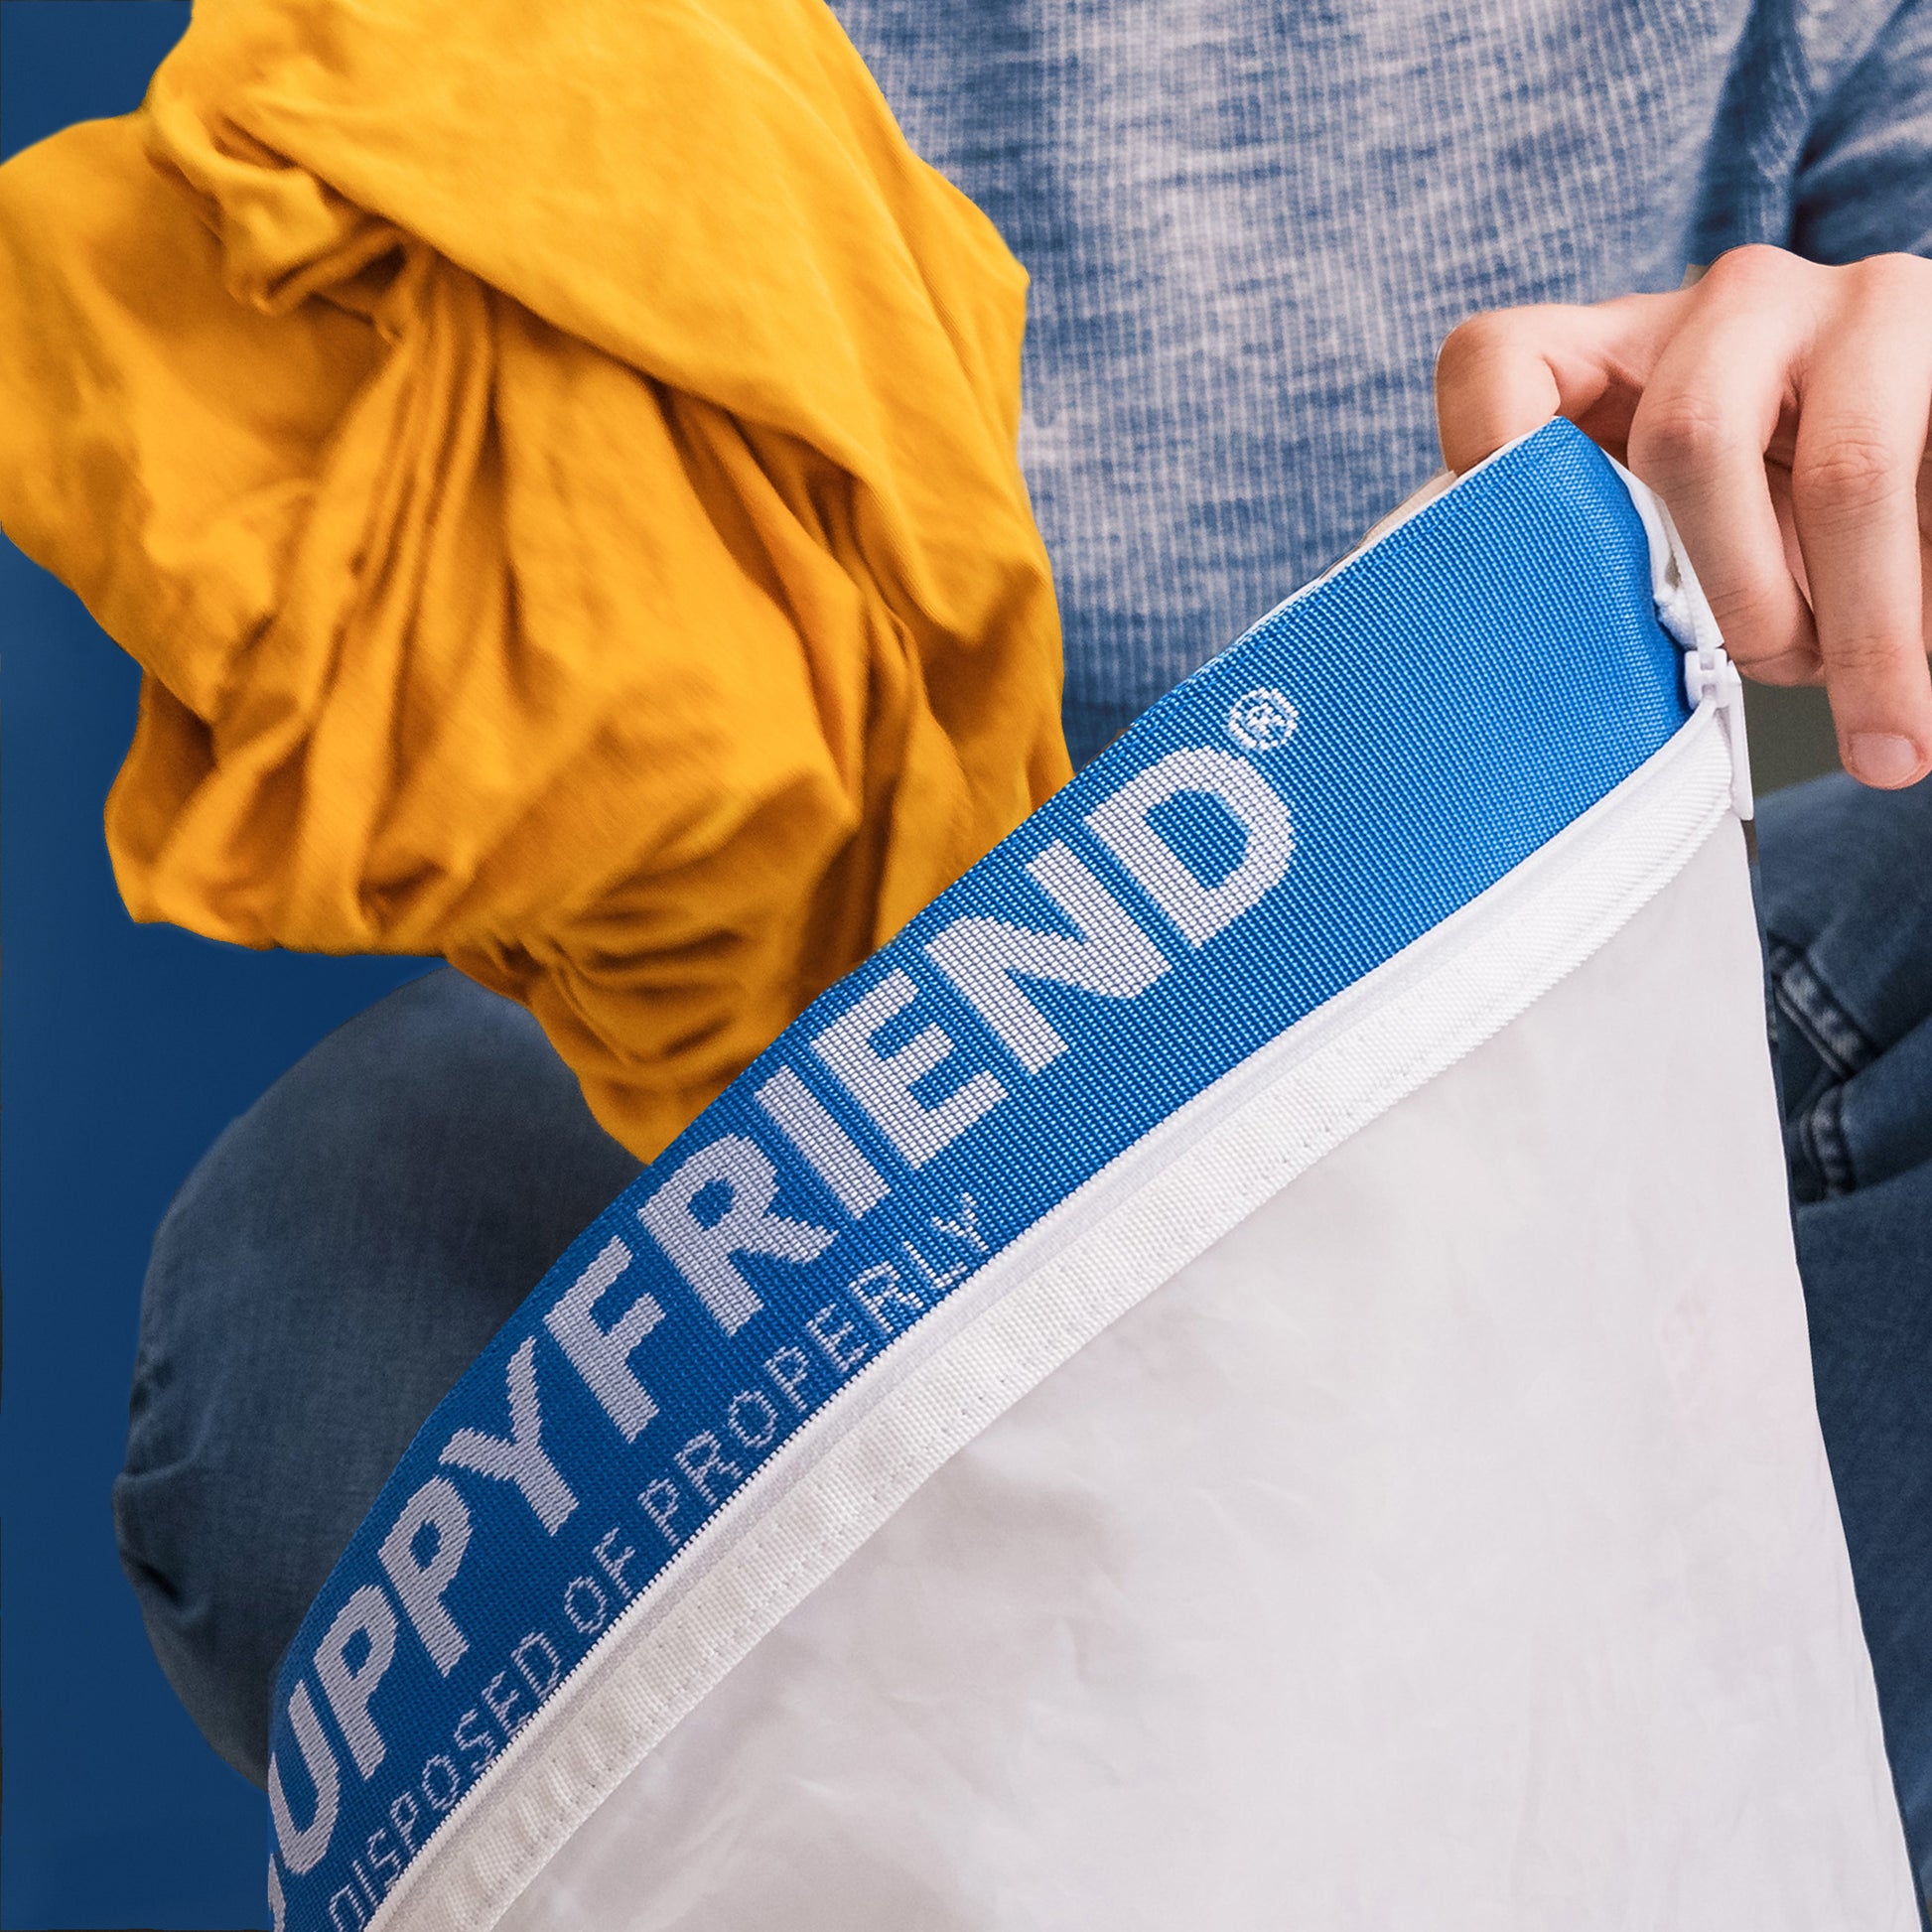 GUPPYFRIEND Washing Bag - Sustainable Laundry Bag, Microfiber Catcher,  Microplastic Reducer